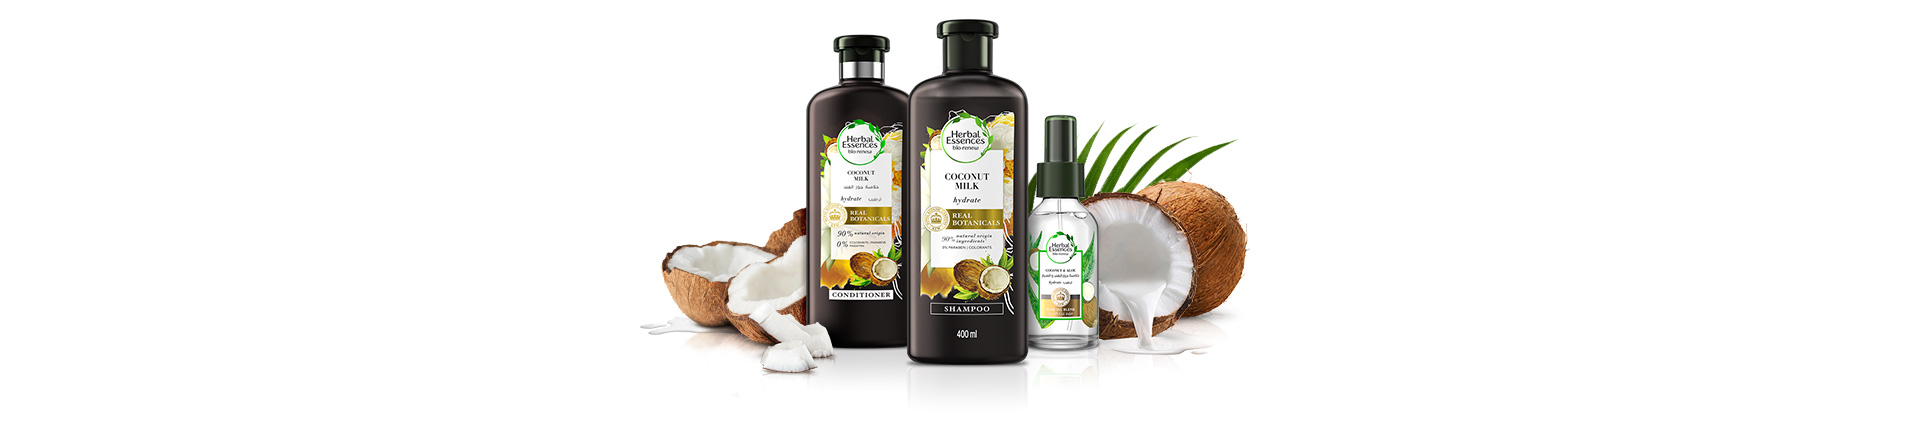 Herbal Essences Coconut Milk collection shampoo, conditioner and oil